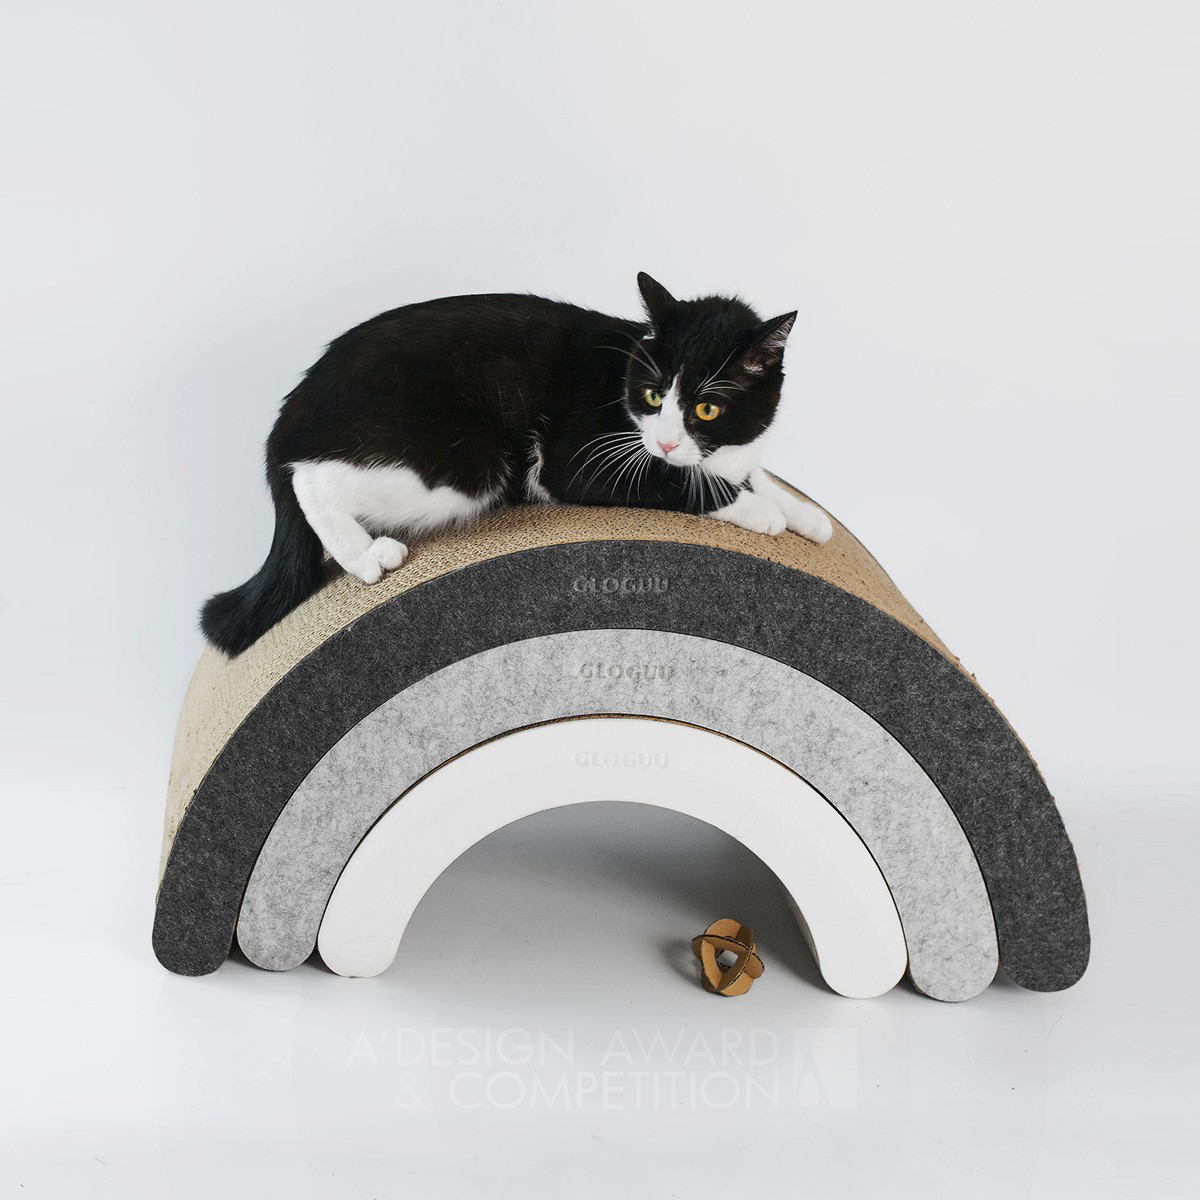 Gloguu Ltd wins Golden at the prestigious A' Pet Care, Toys, Supplies and Products for Animals Design Award with Scratch Cave Cat Scratcher.